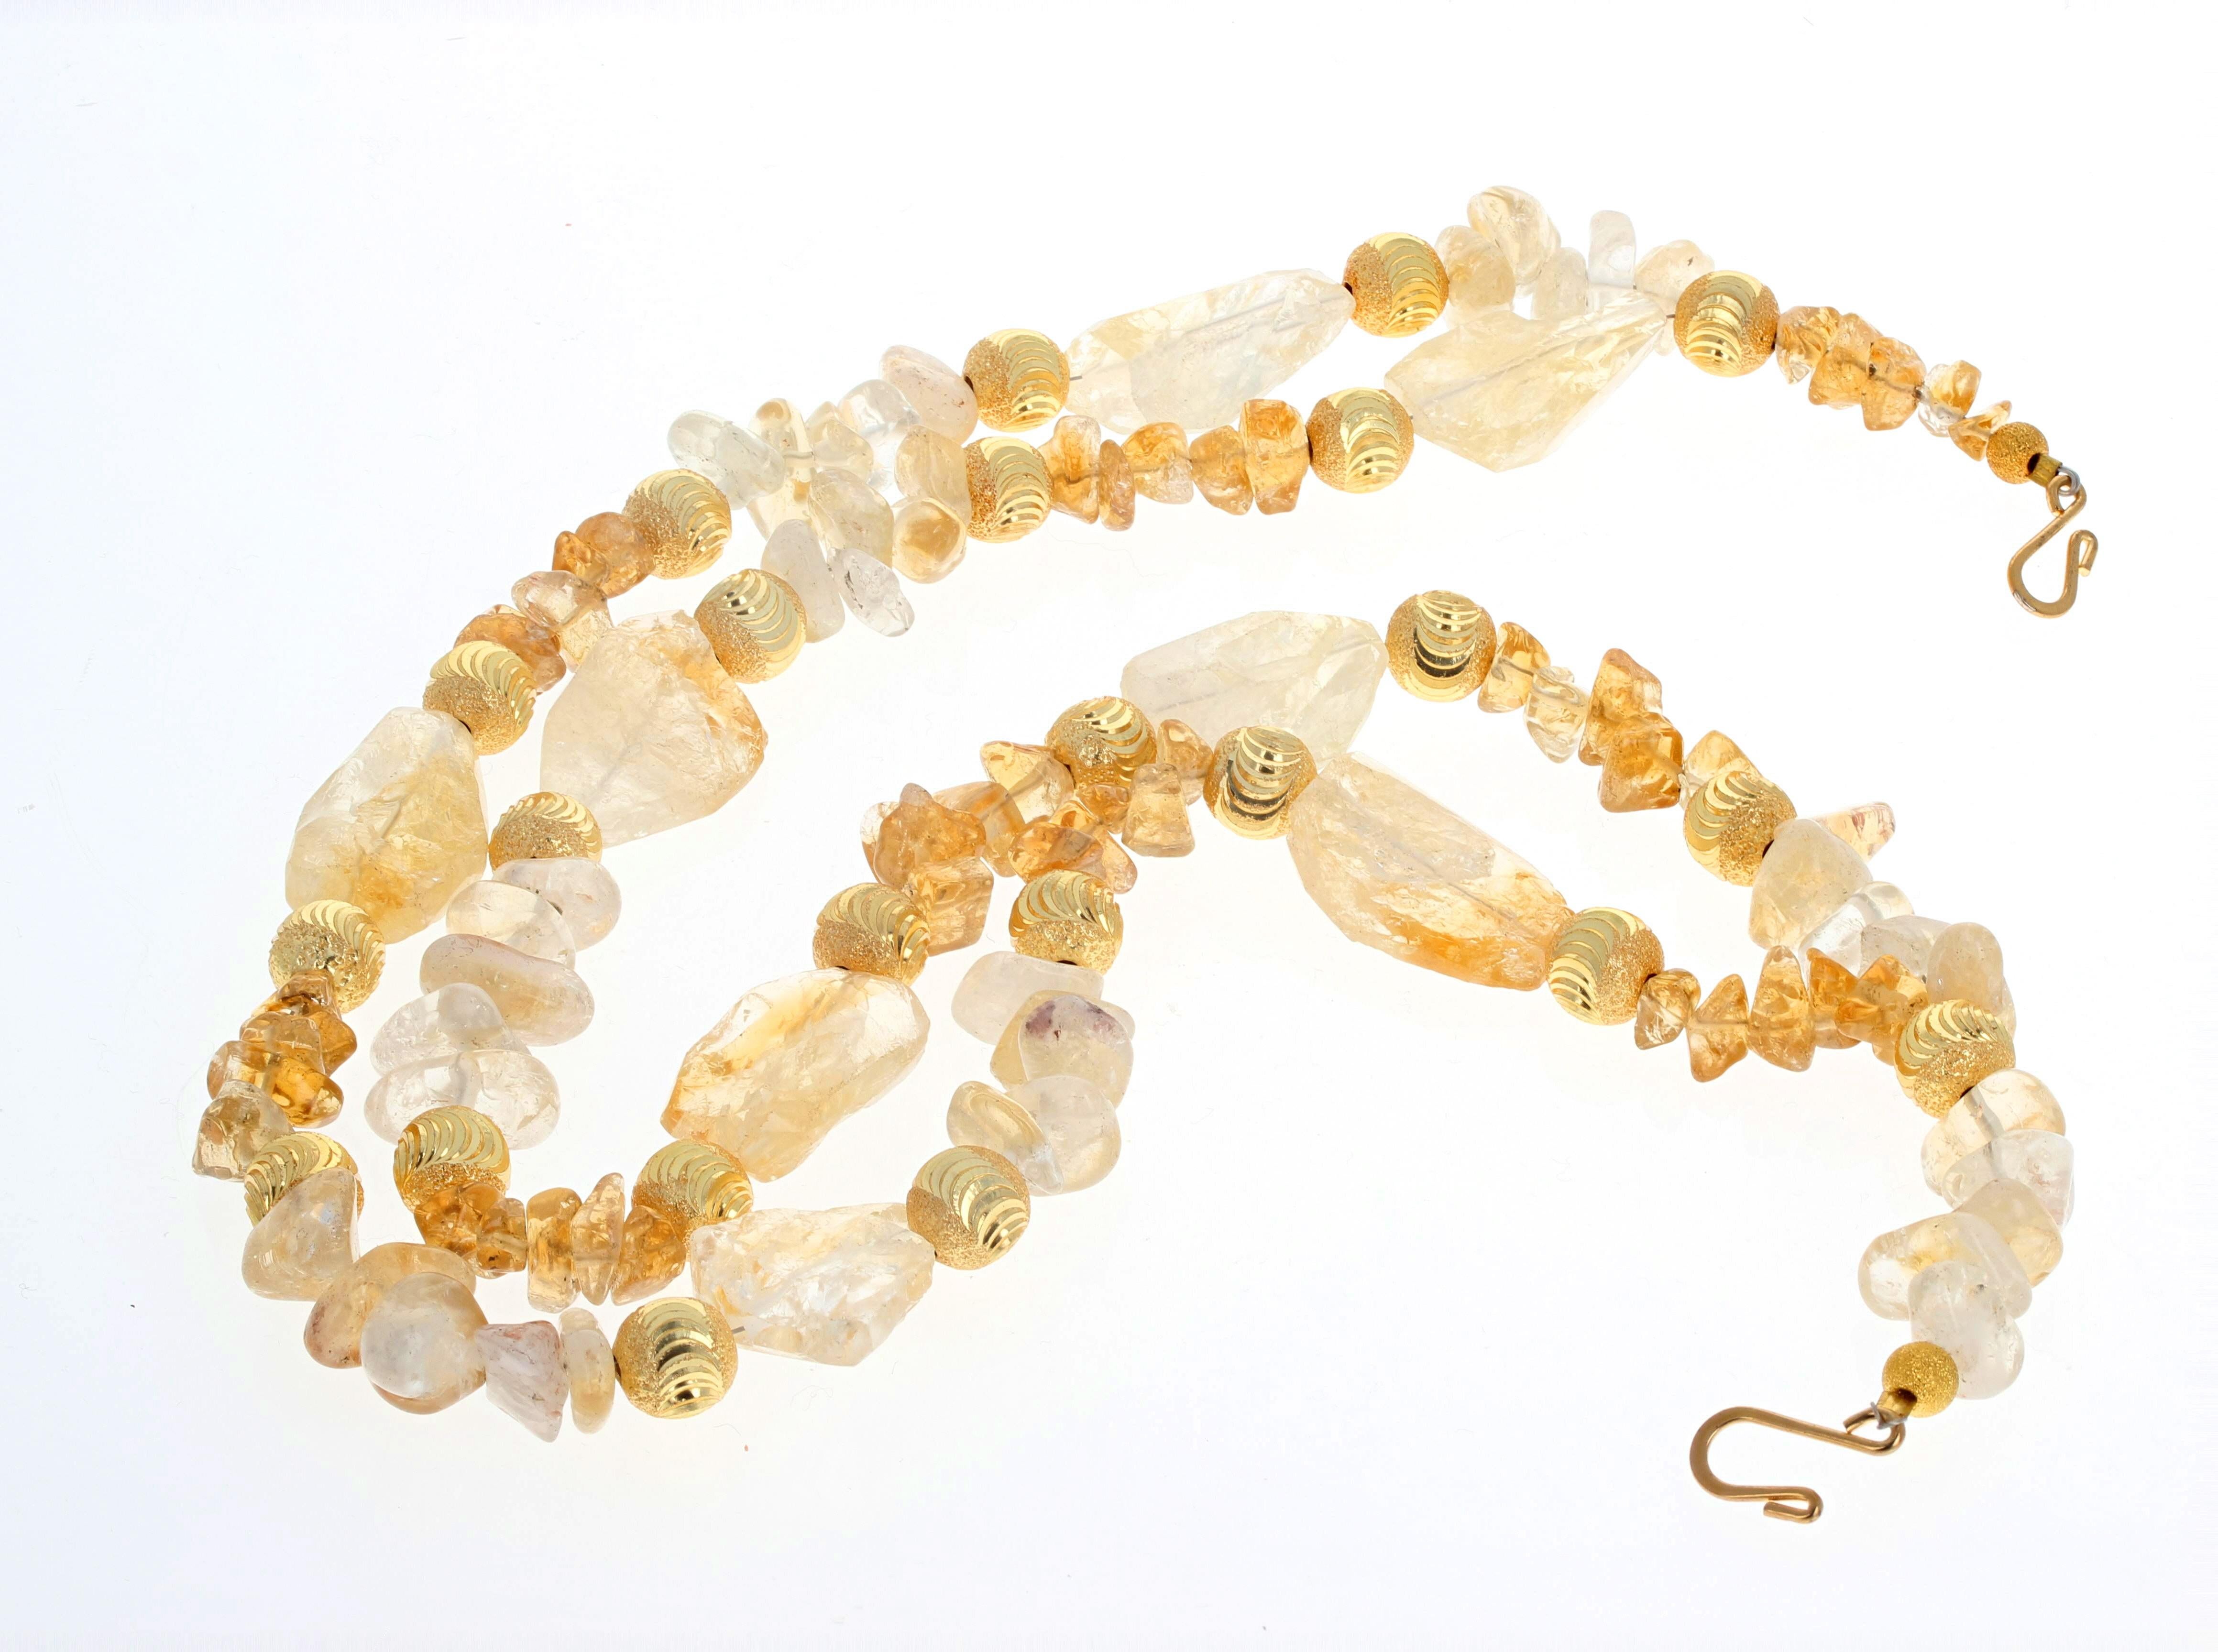 Taille mixte AJD Dramatic Natural Real Citrine Gemstone Collier de roches polies